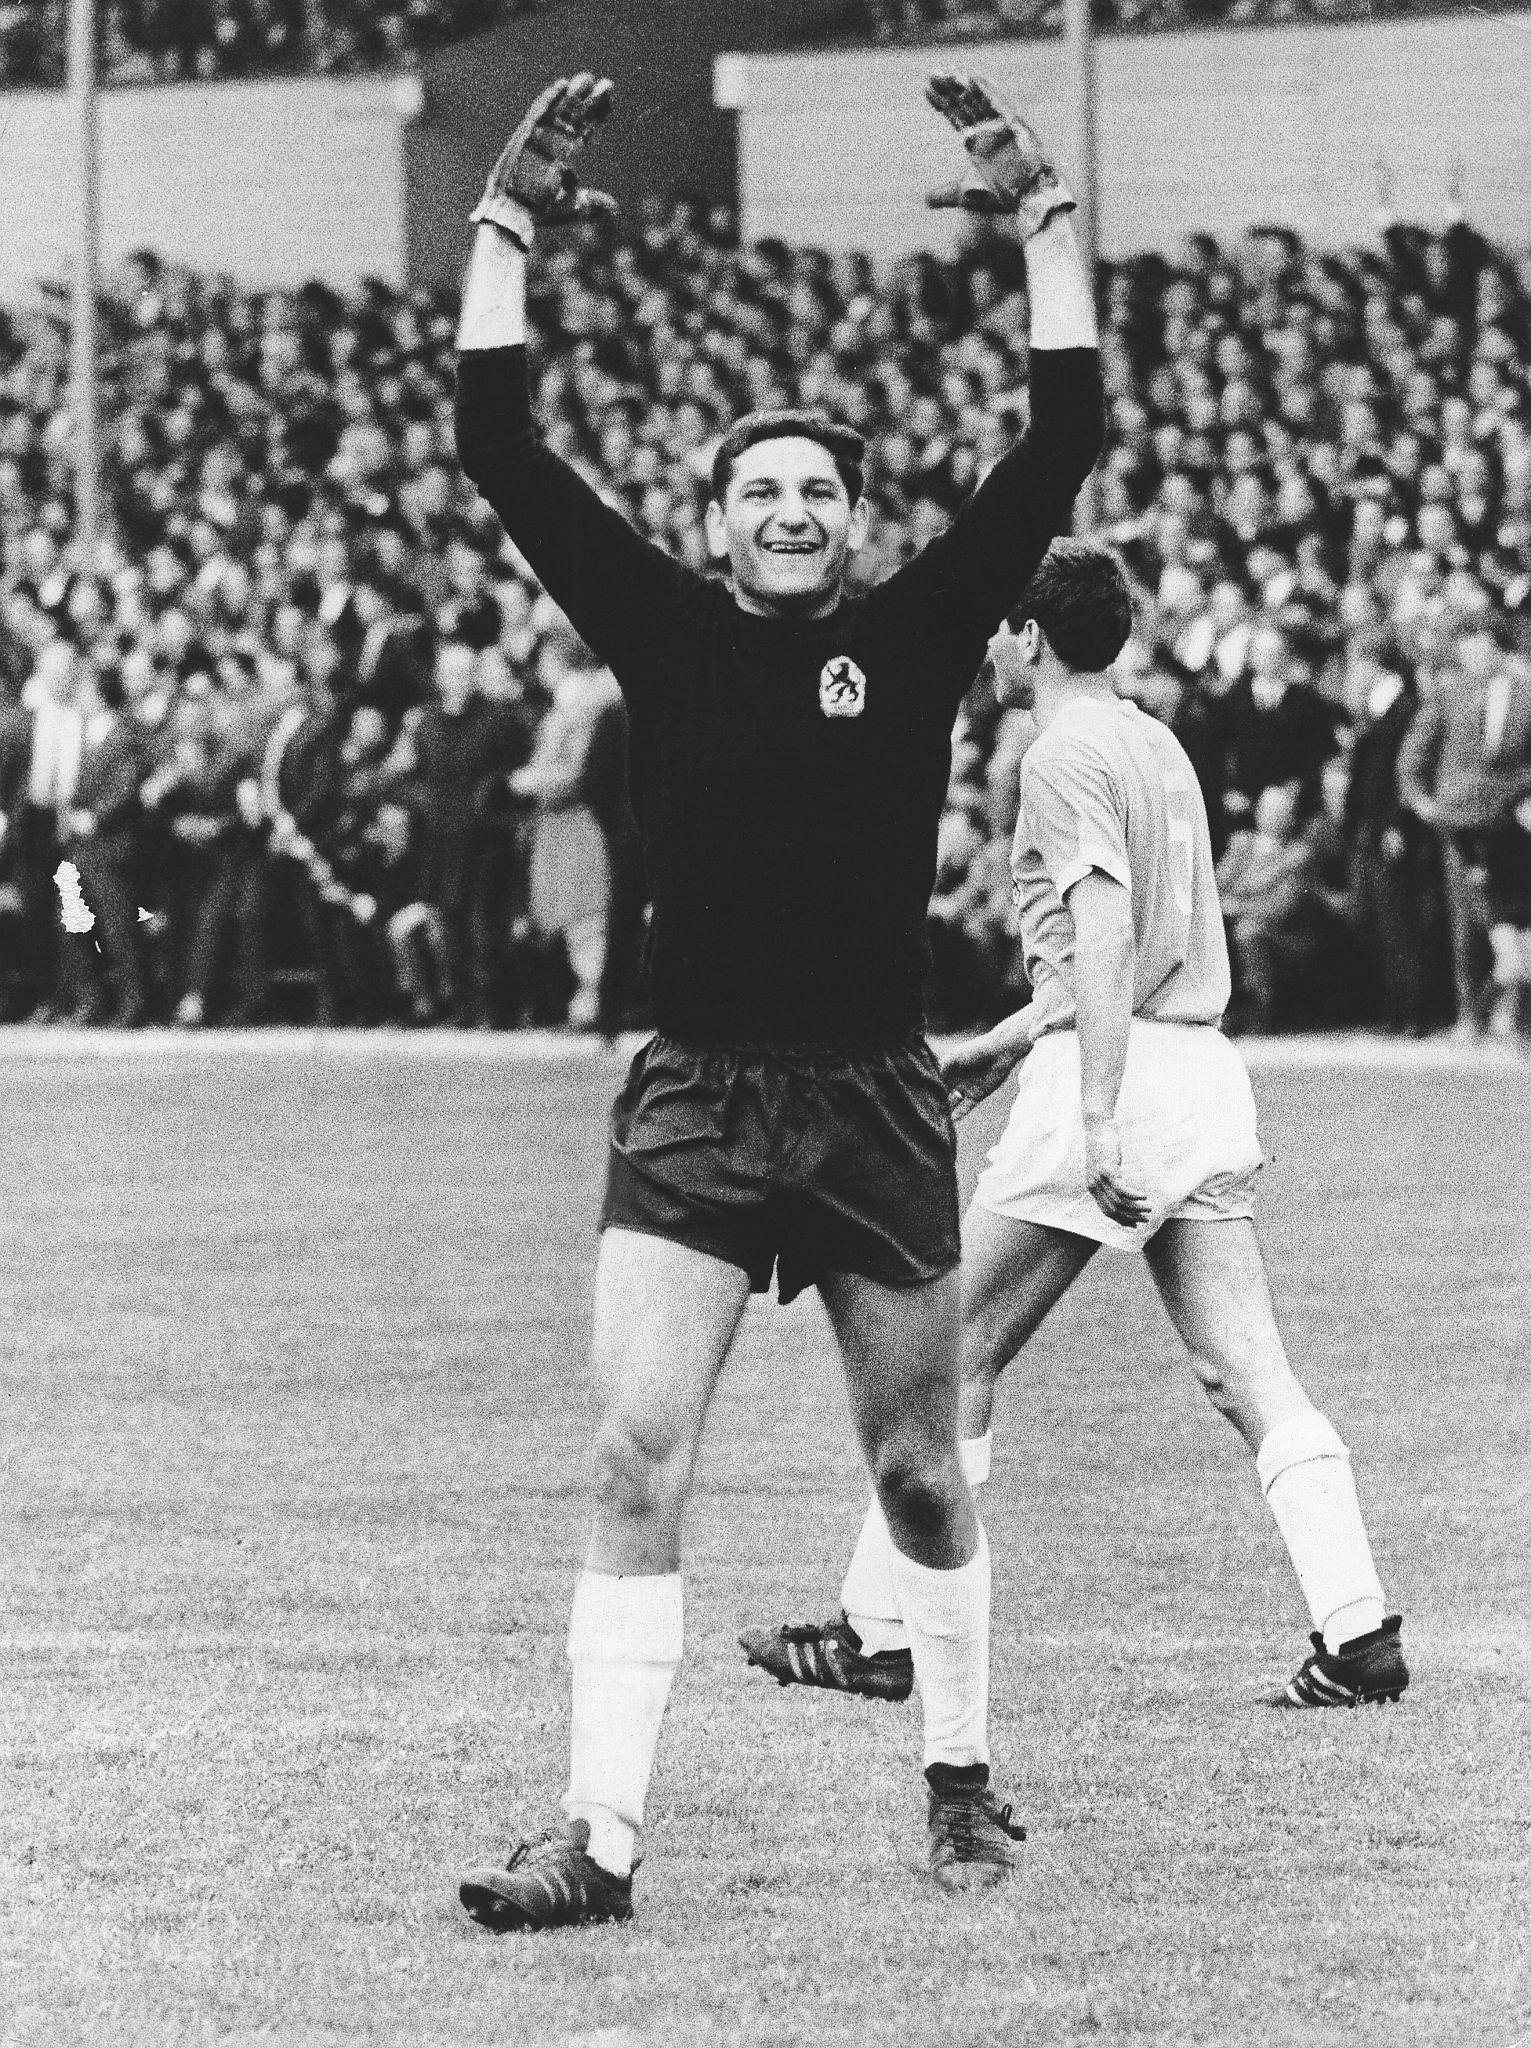 Petar Radenkovic, goalkeeper for TSV 1860 Munich, raising his arms in a game against Borussia Dortmund on May 21, 1966.